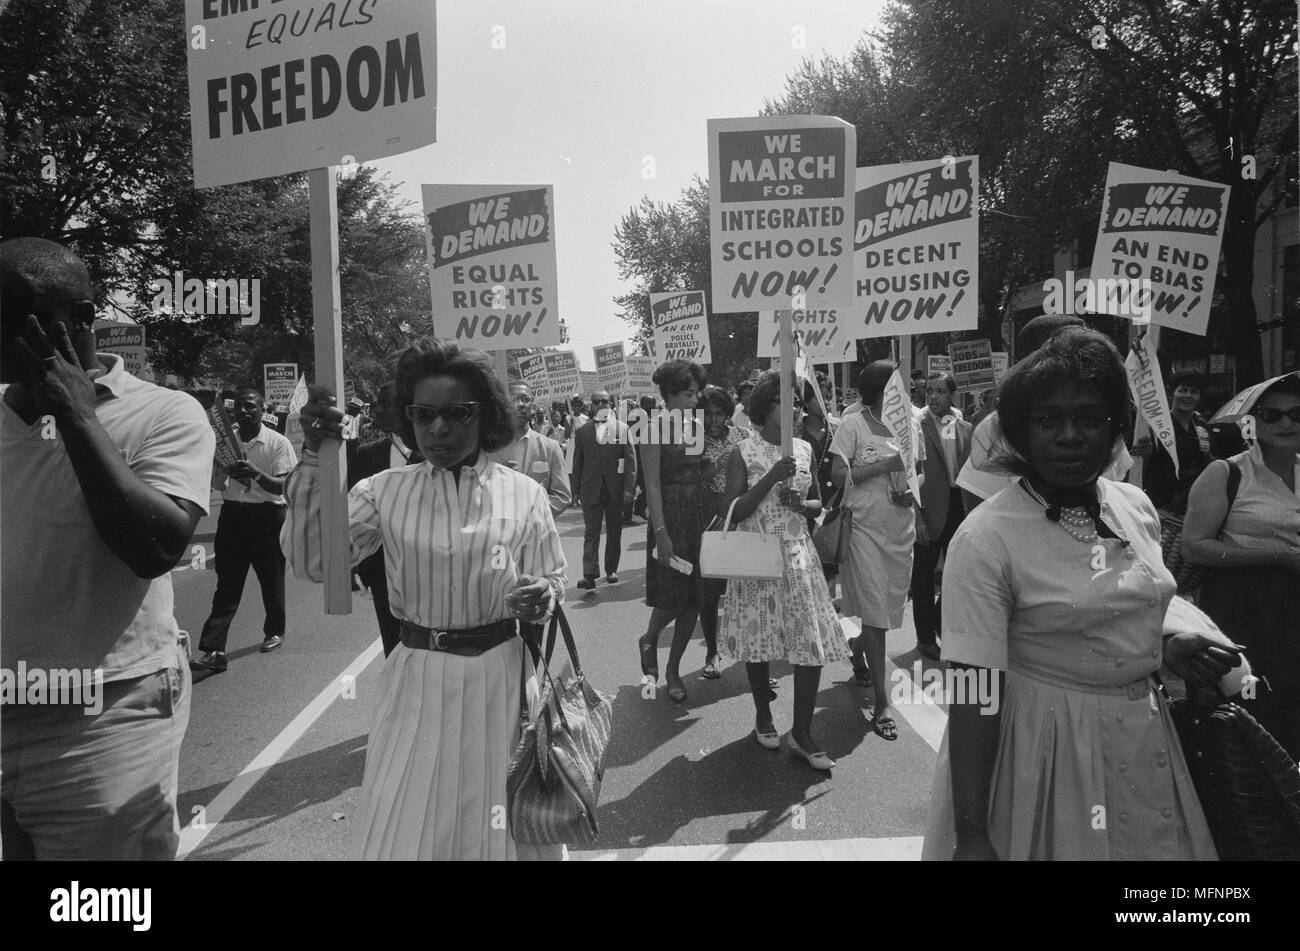 Civil rights march on Washington, DC, USA.  Procession of African Americans carrying placards demanding equal rights, integrated schools, decent housing, and an end to bias.  28 August 1963. Photographer:  Warren K  Leffler. Stock Photo